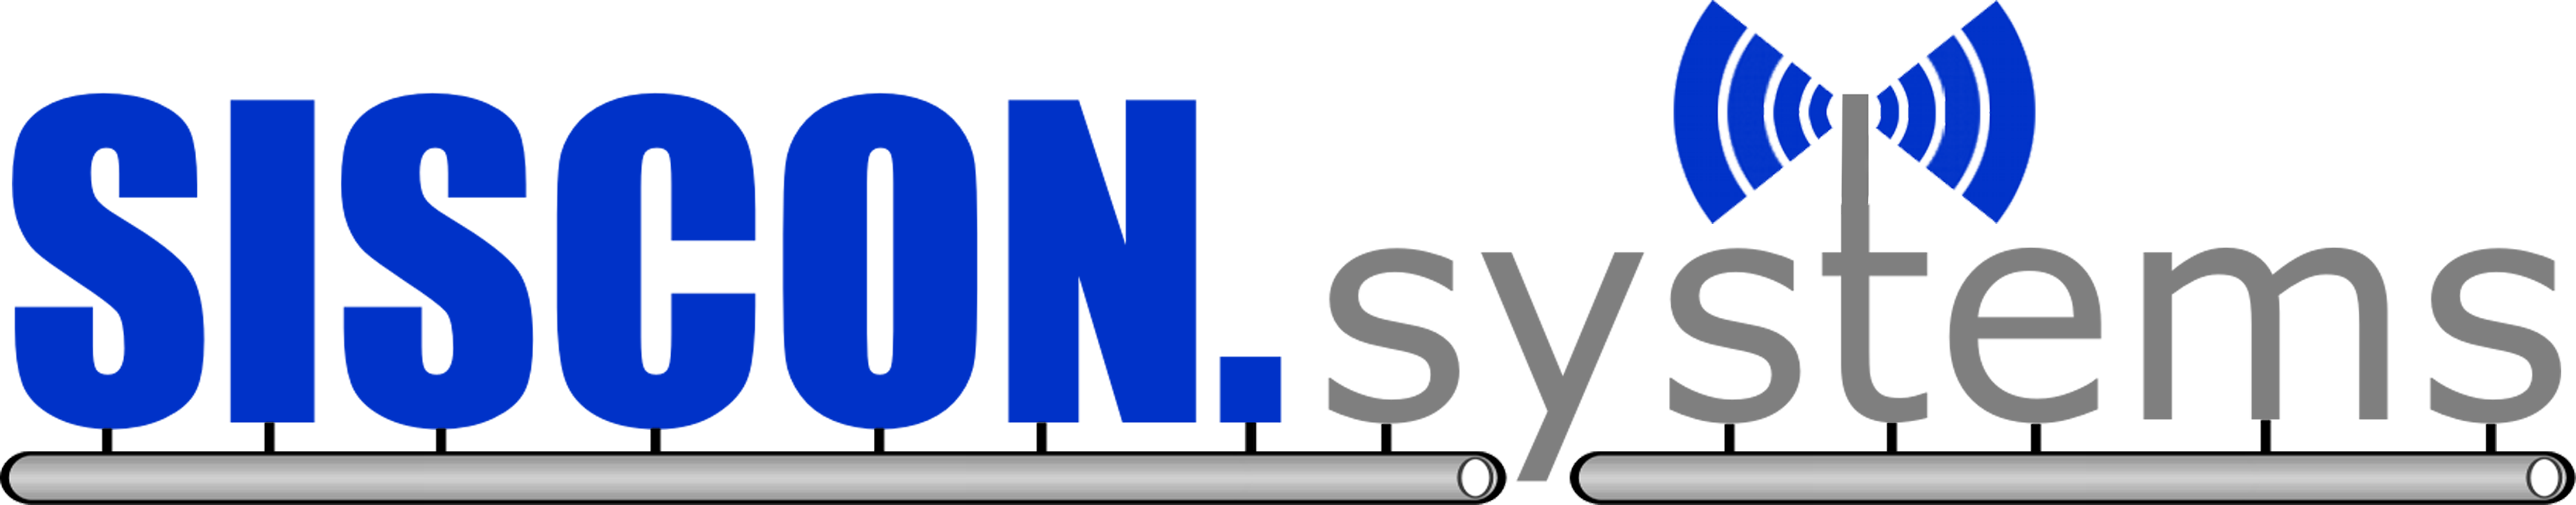 SISCON.systems GmbH & Co. KG